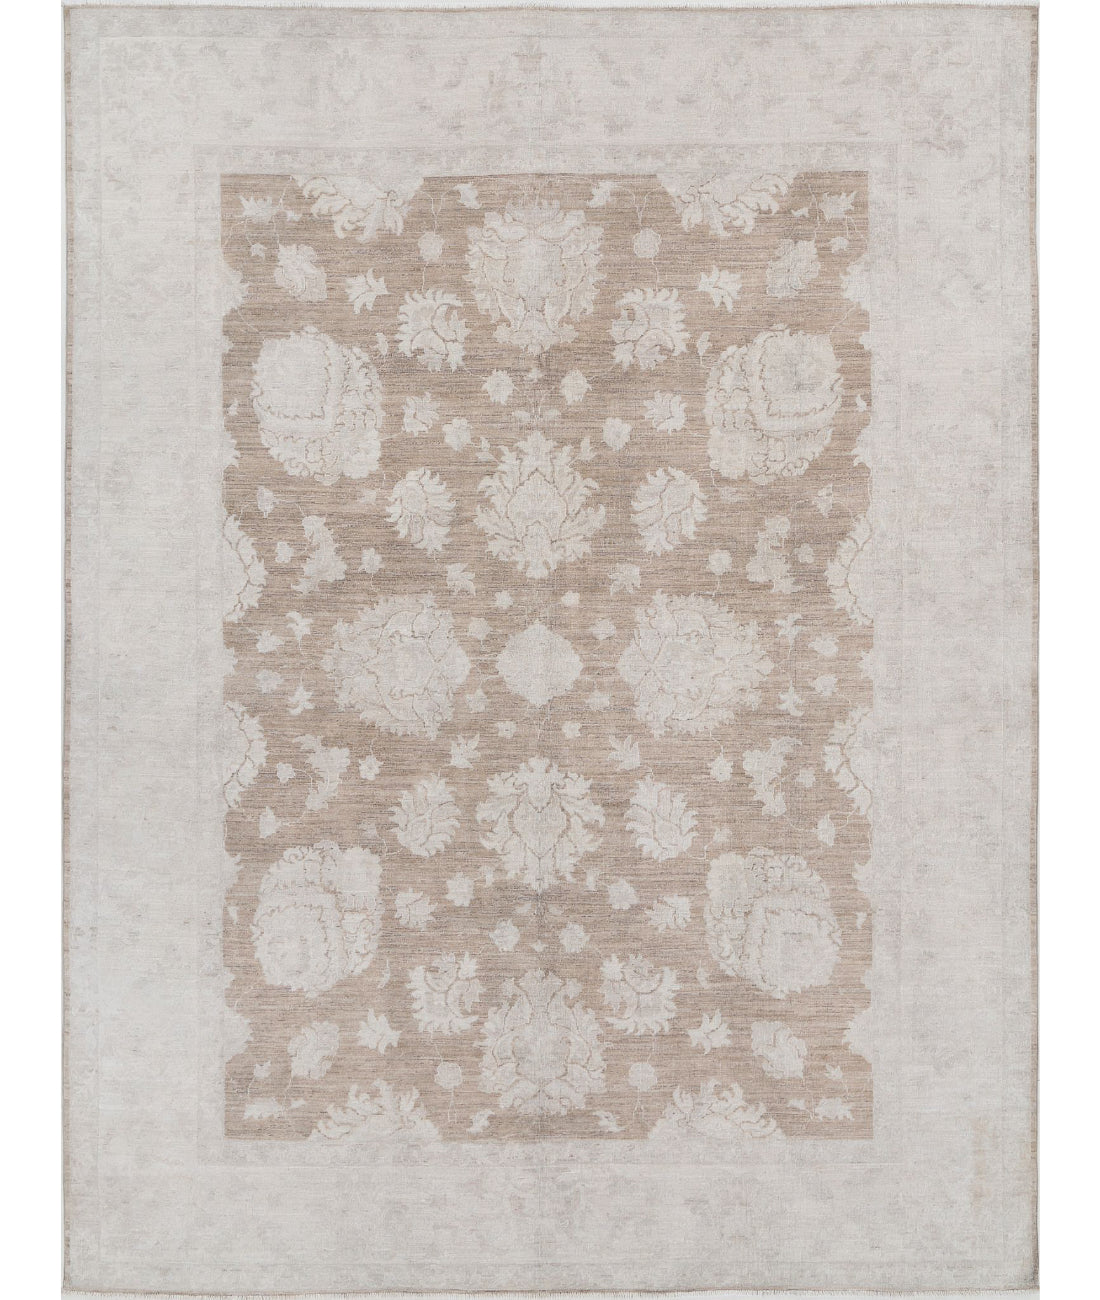 Hand Knotted Serenity Wool Rug - 7'11'' x 10'6'' 7'11'' x 10'6'' (238 X 315) / Taupe / Ivory